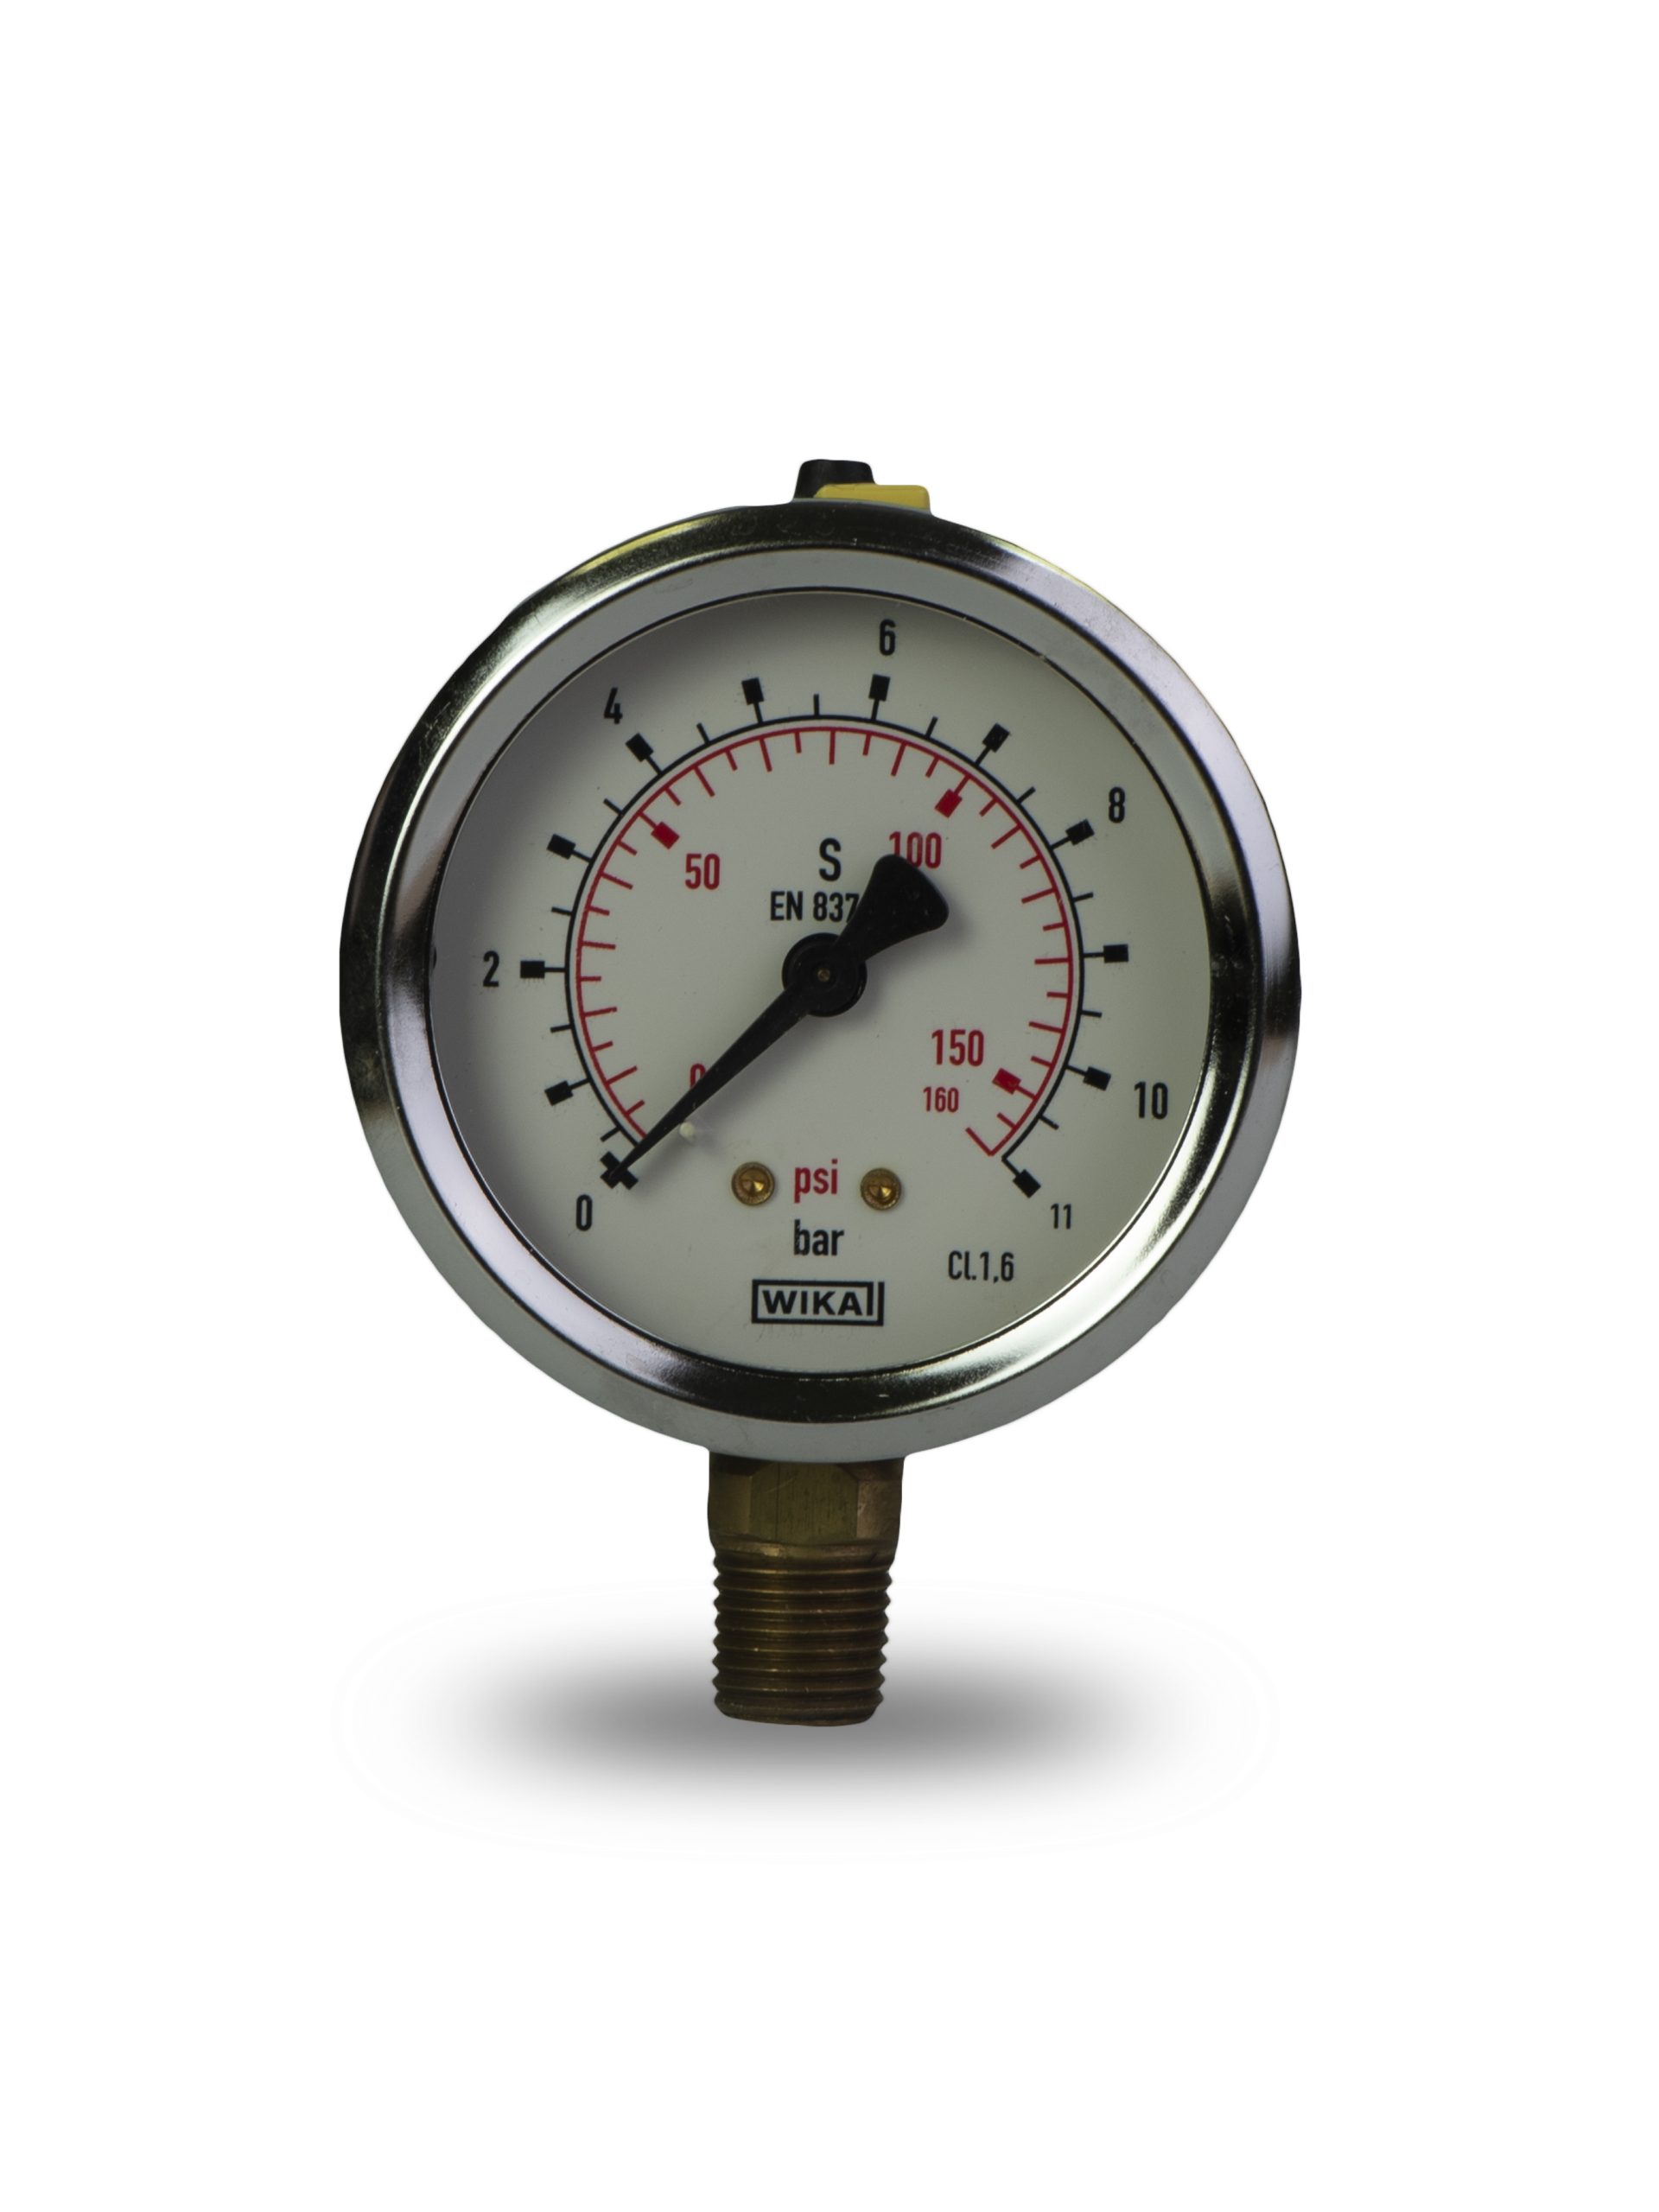 PRESSURE GAUGE 0-11 BAR DIAMETER 2 1/2 Inches CONNECTION1/4 Inches,  WIKA from Gas Equipment Company Llc Abu Dhabi, UNITED ARAB EMIRATES